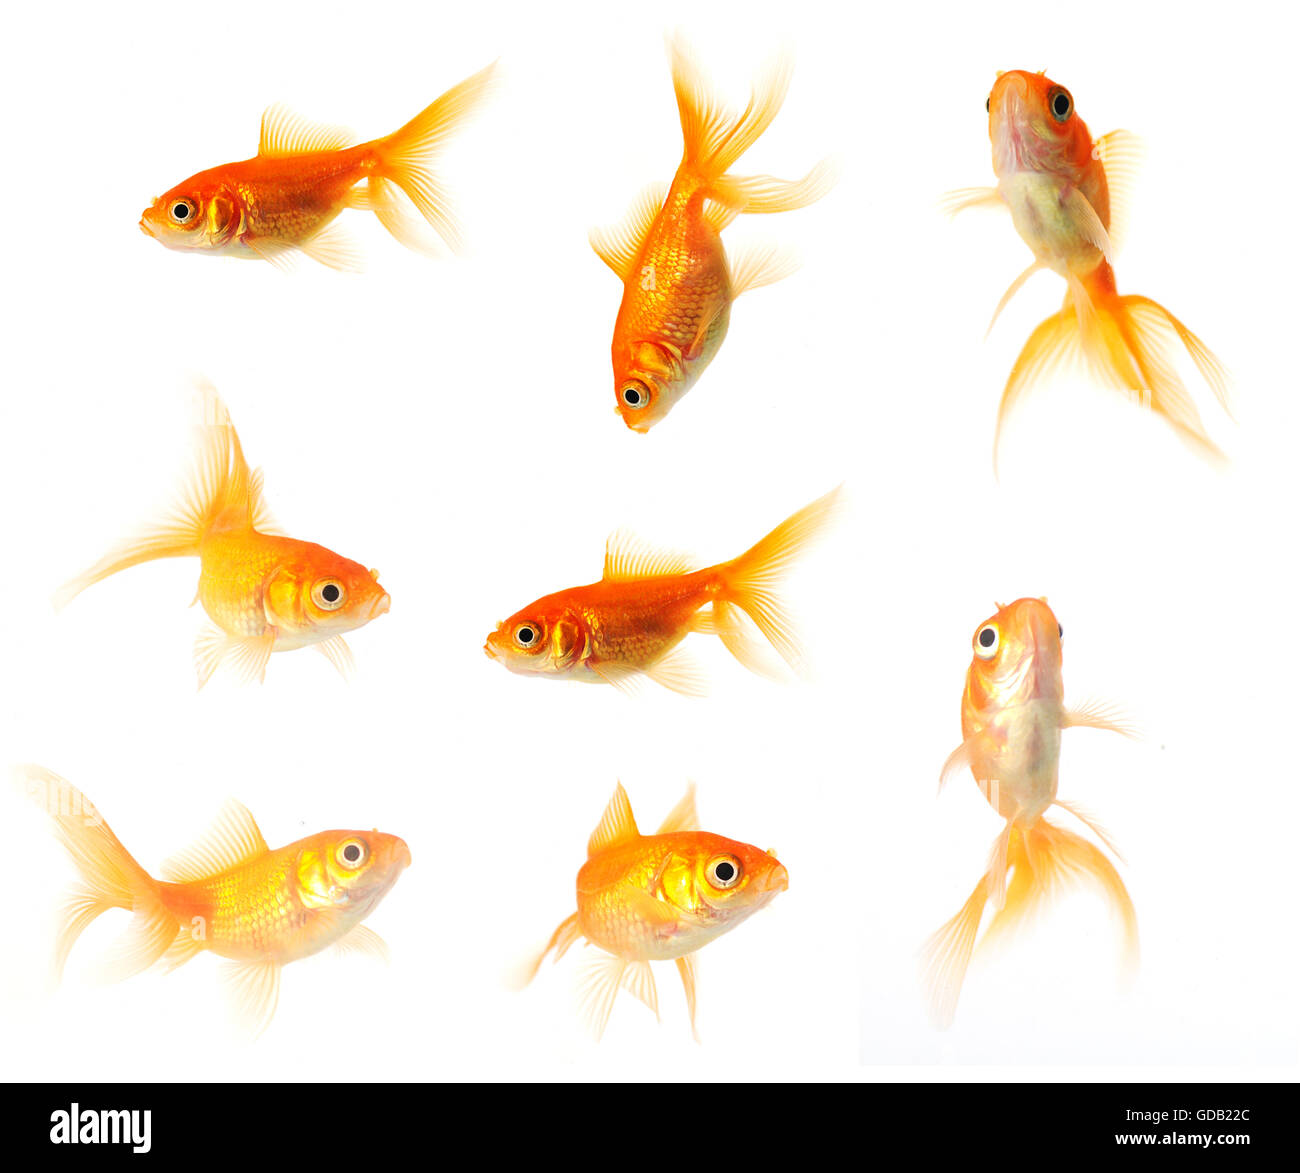 collection of goldfish isolated on white in 24mp. file Stock Photo